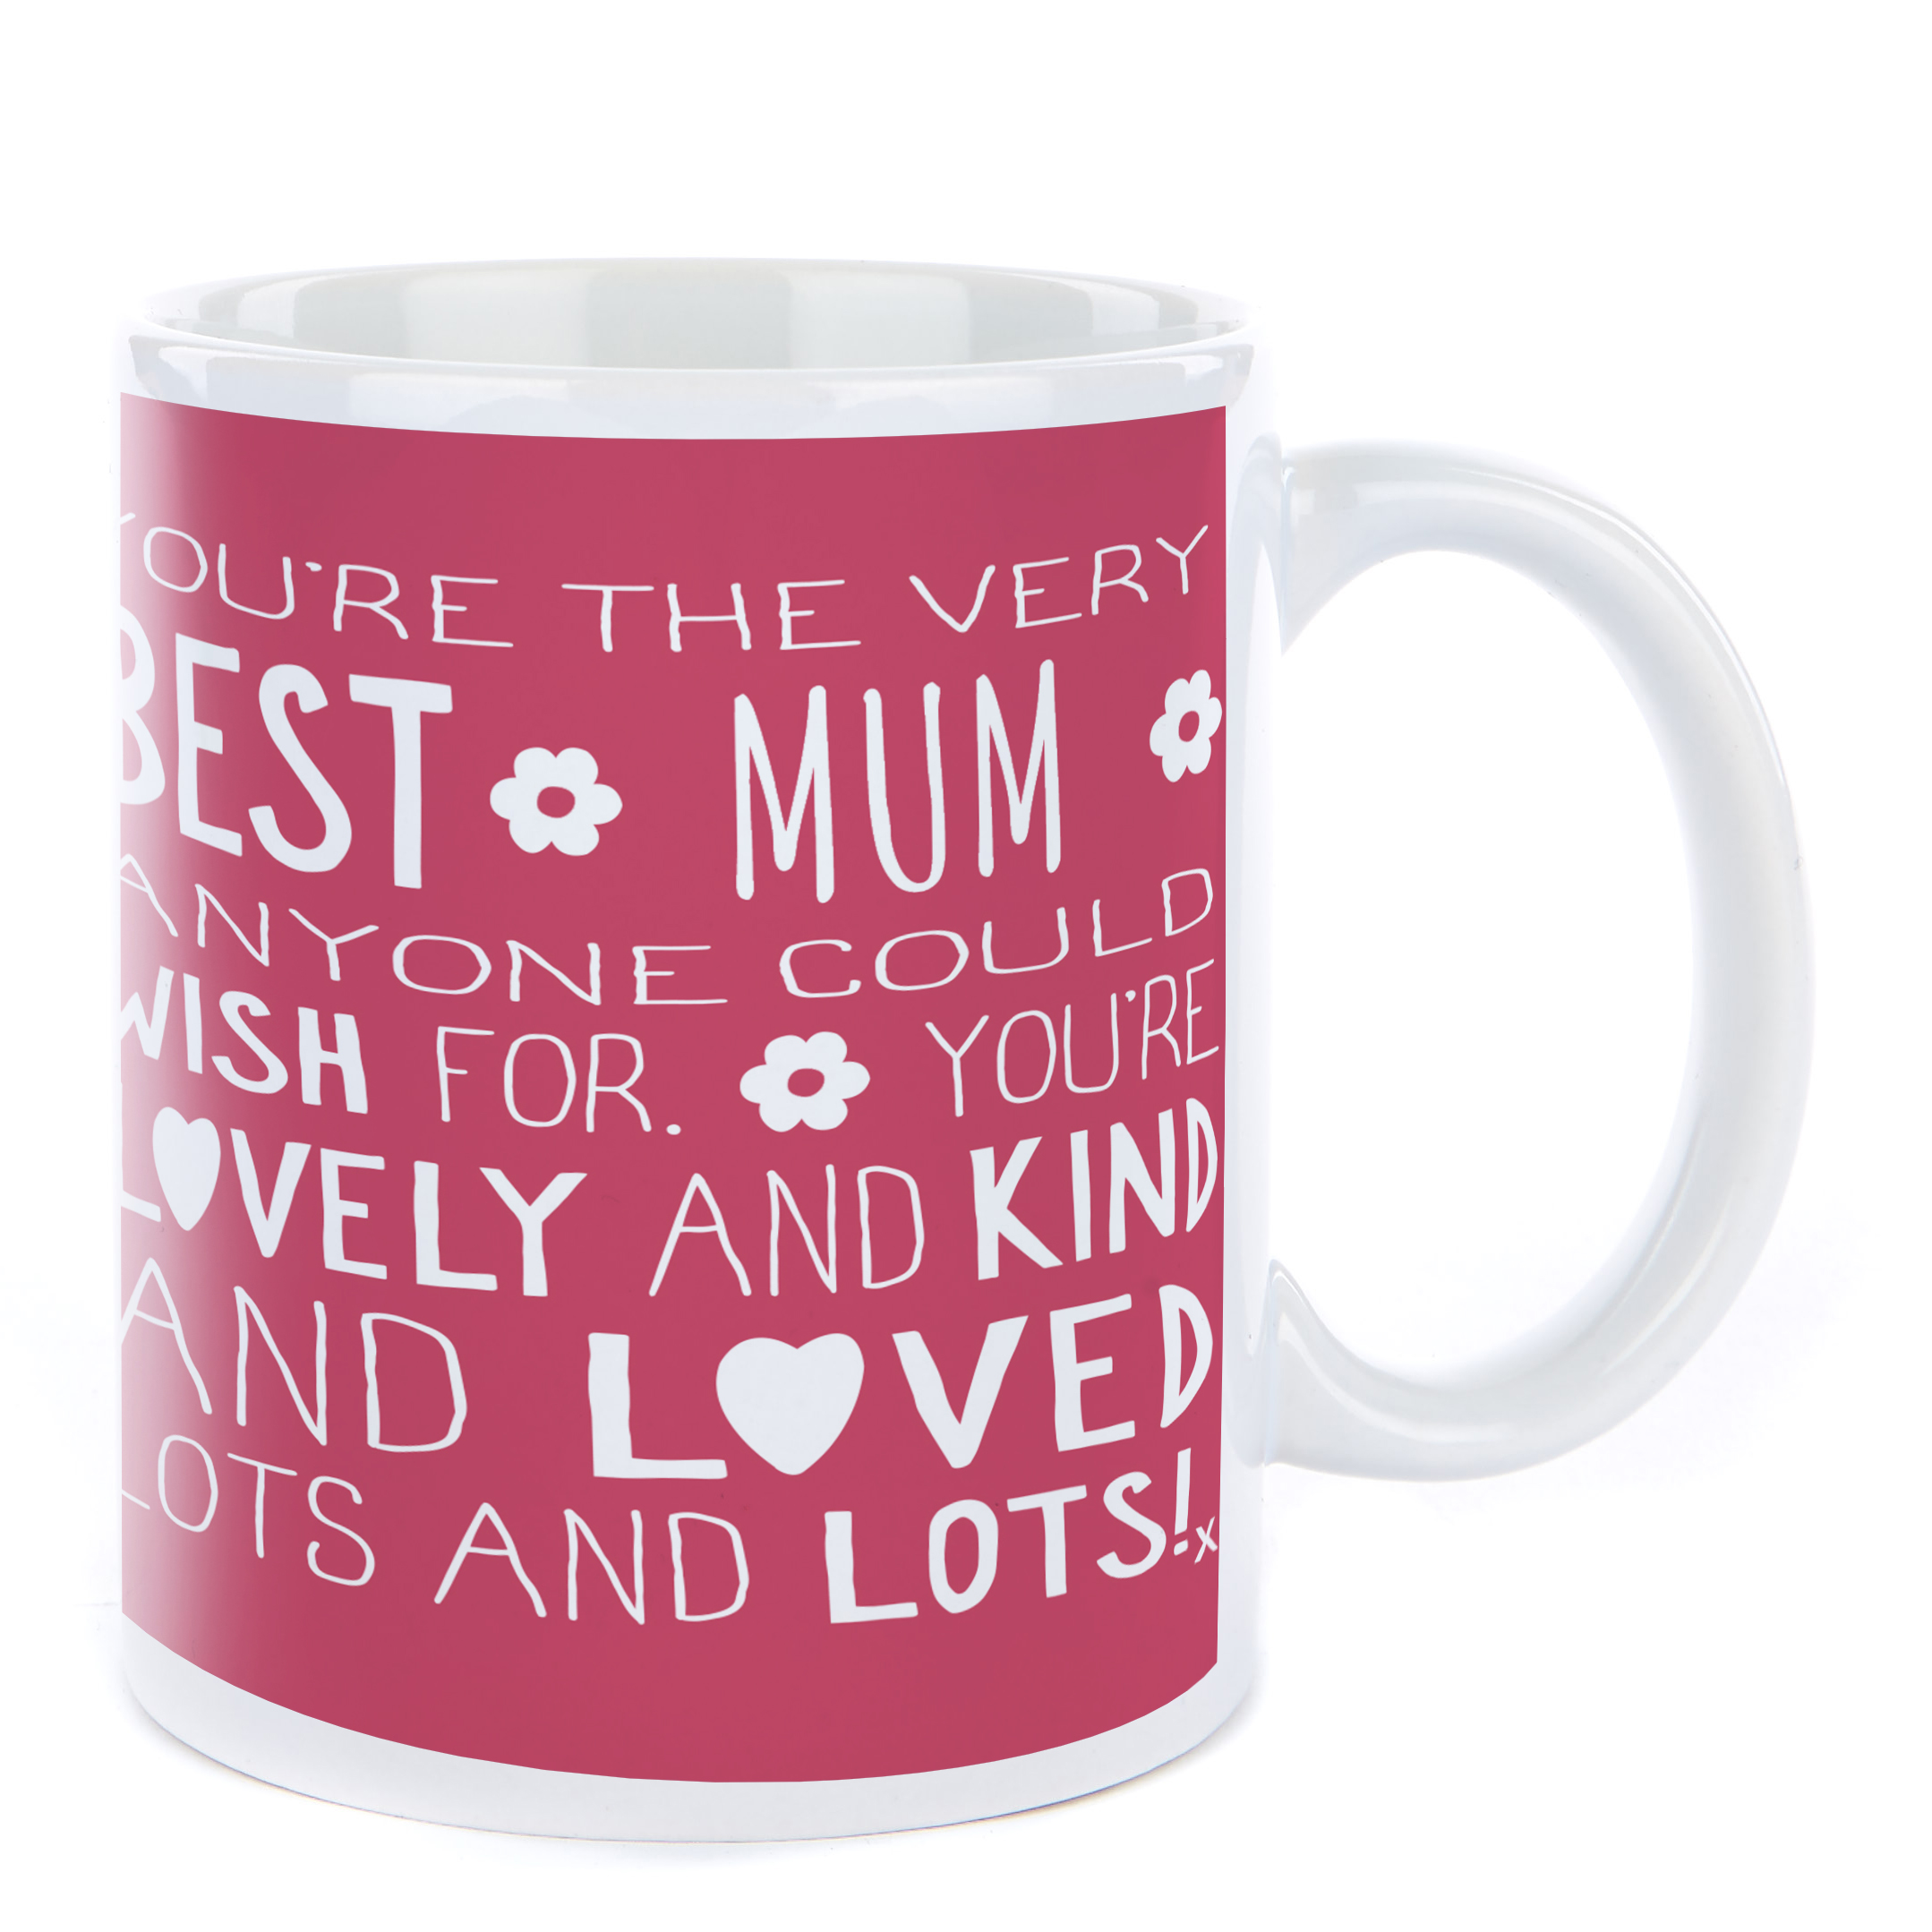 Personalised Mug - You're The Very Best...